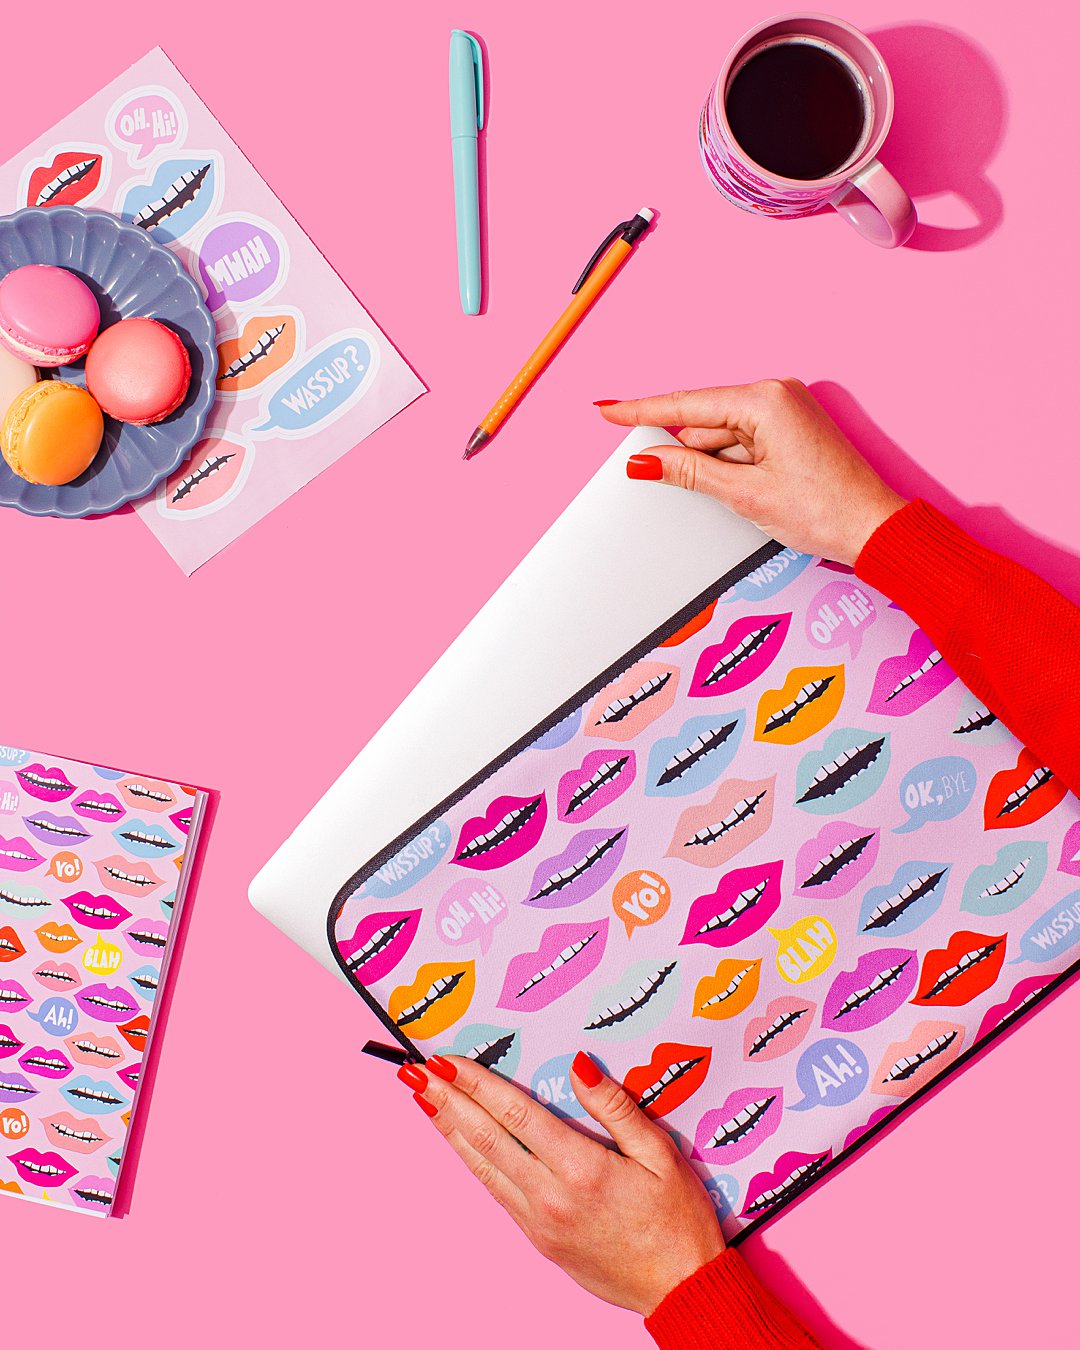 Colourful product photography for HIYA CREATIVE stationery accessories. Styled still life photography by HIYA MARIANNE.